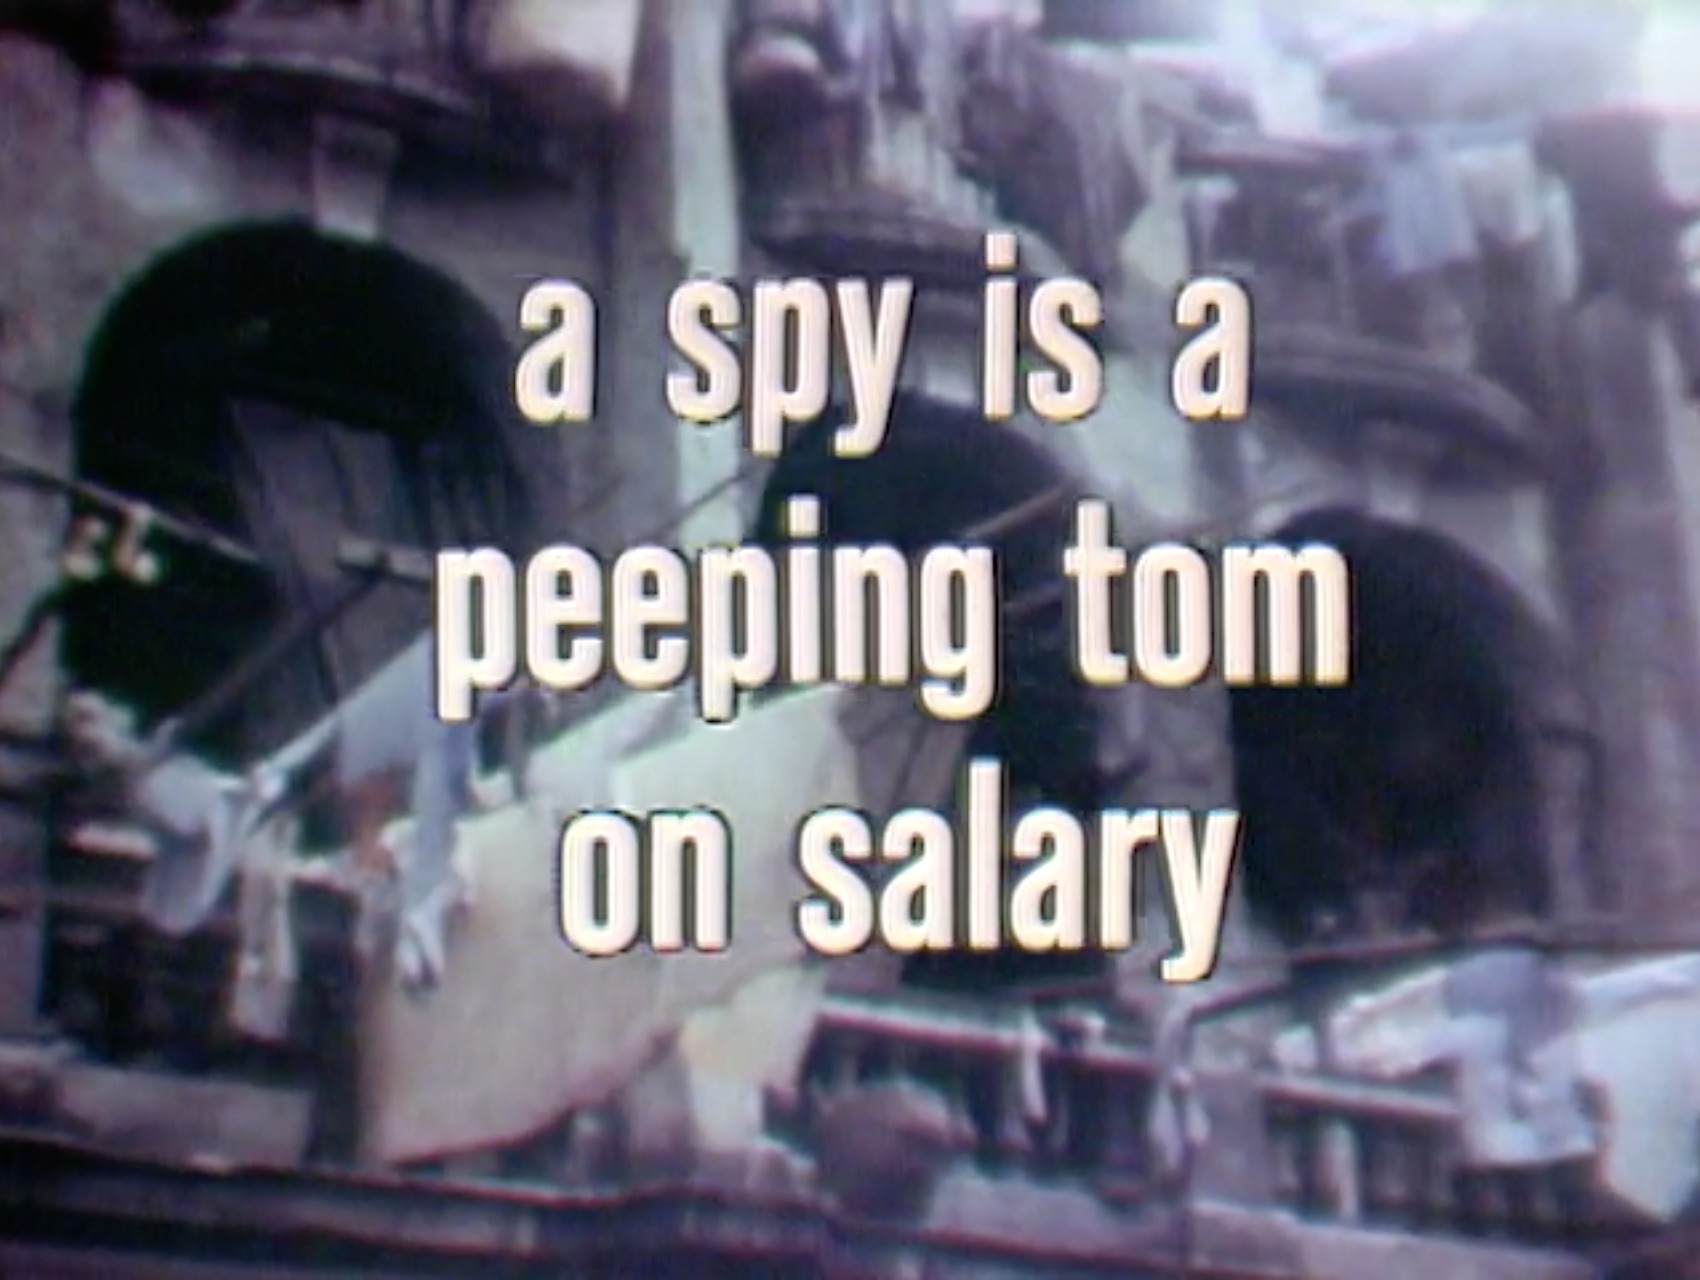 A Spy is Peeping Tom on Salary - The Red Skelton Show, season 17, with Fernando Lamas - originally aired October 10, 1967